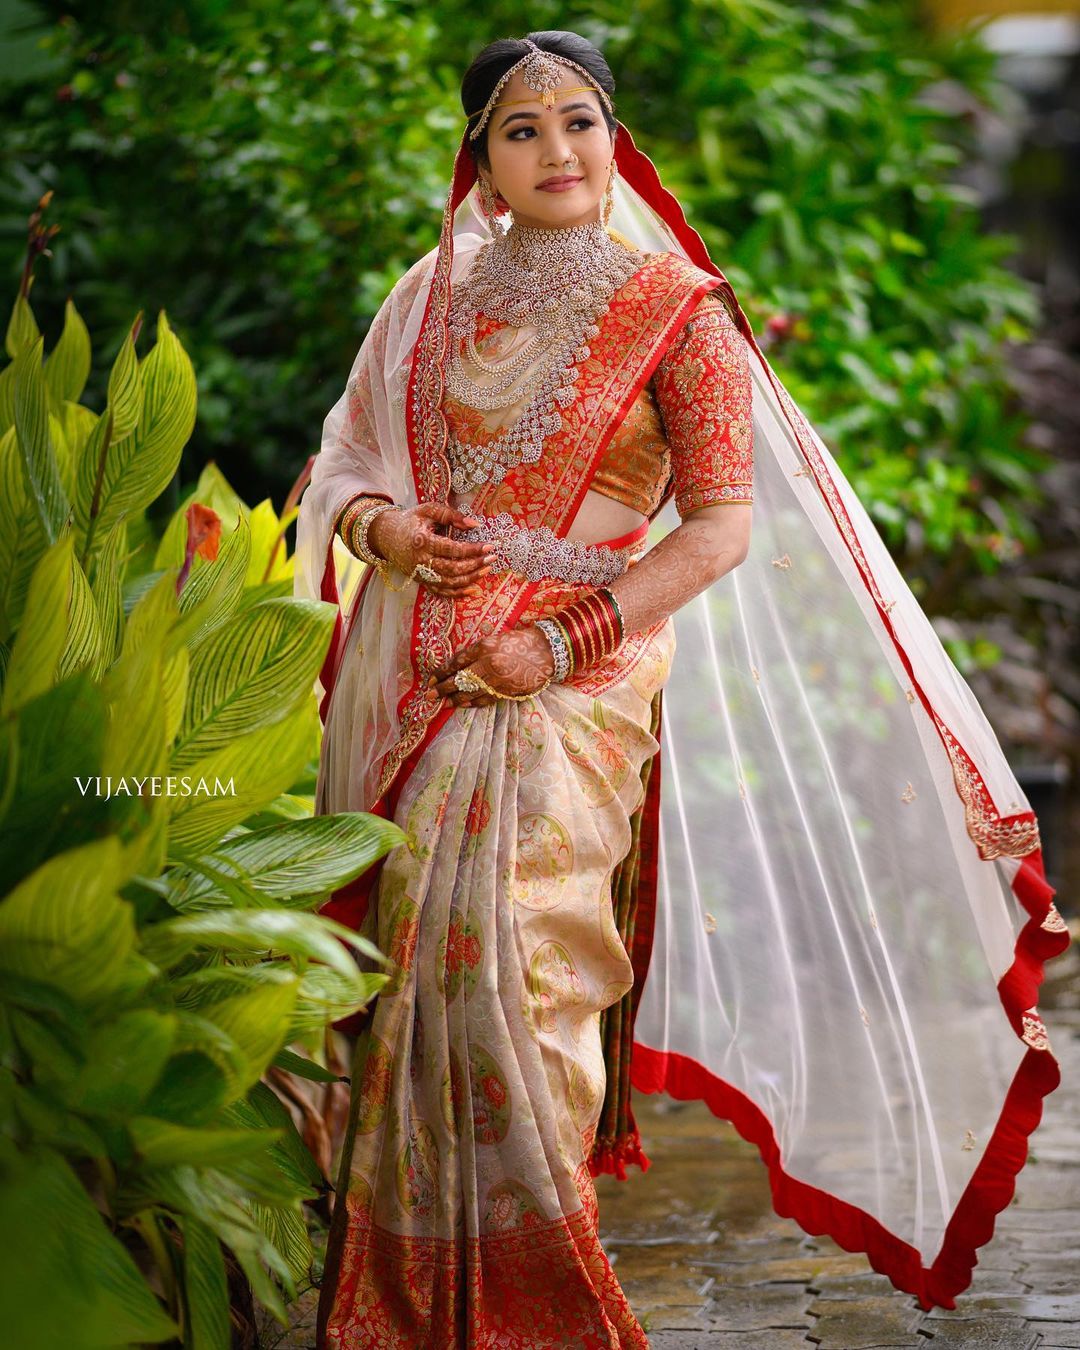 modern south indian bride wearing red and cream saree with dupatta and diamond jewellery 